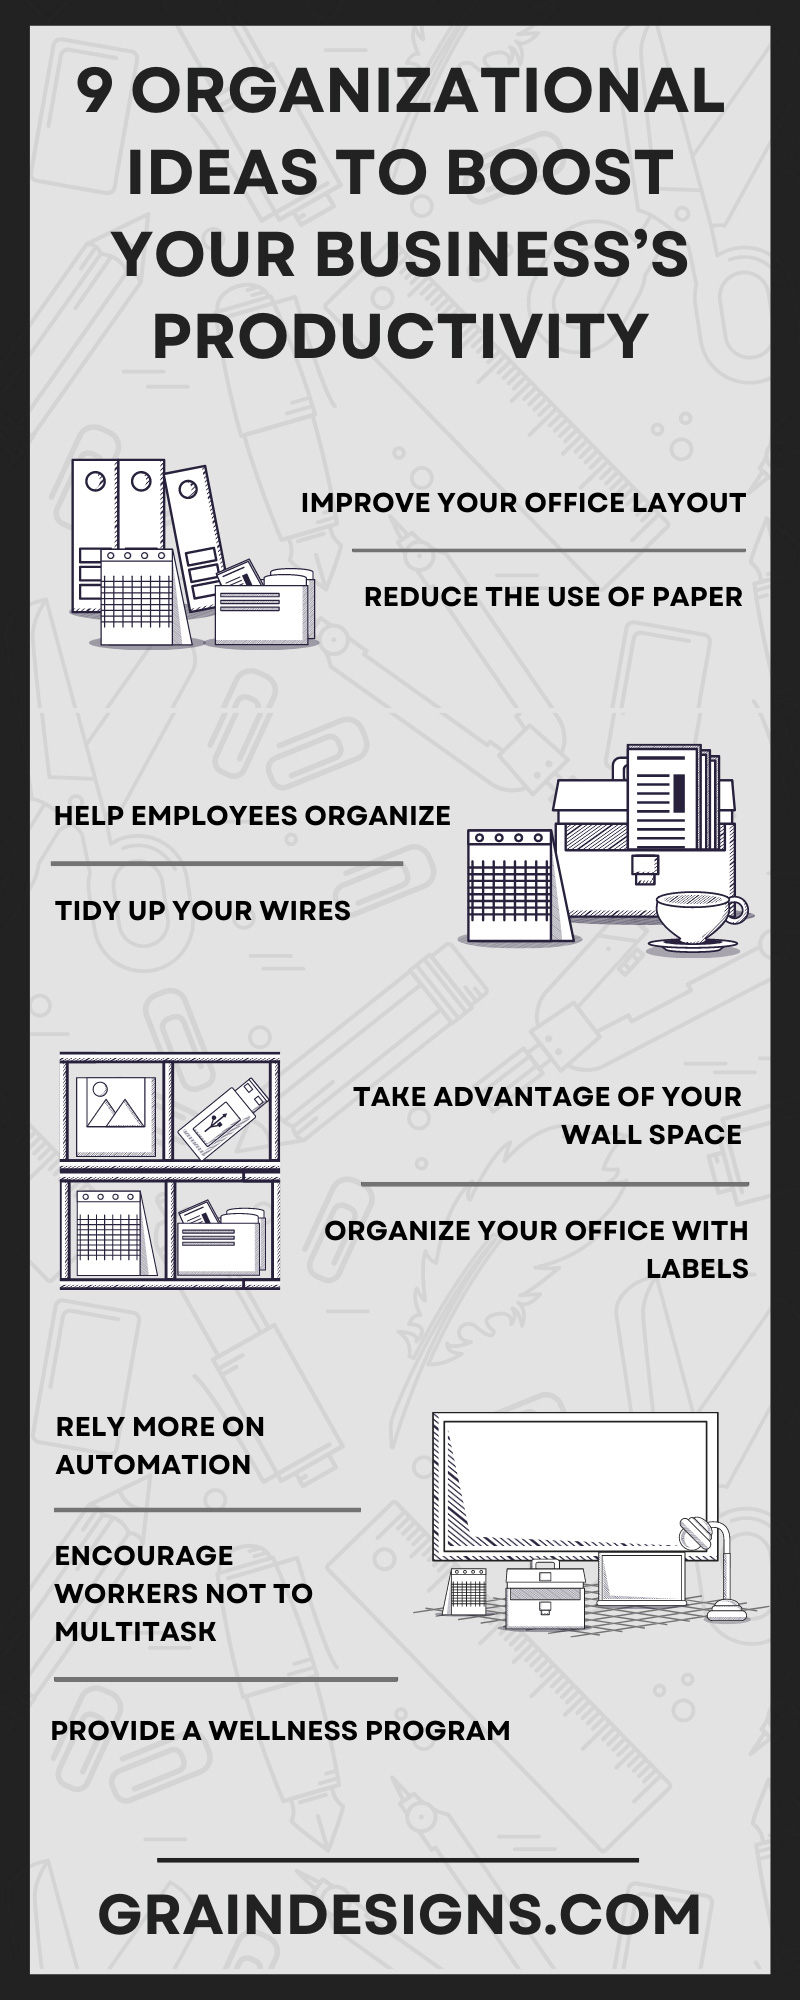 9 Organizational Ideas To Boost Your Business’s Productivity 